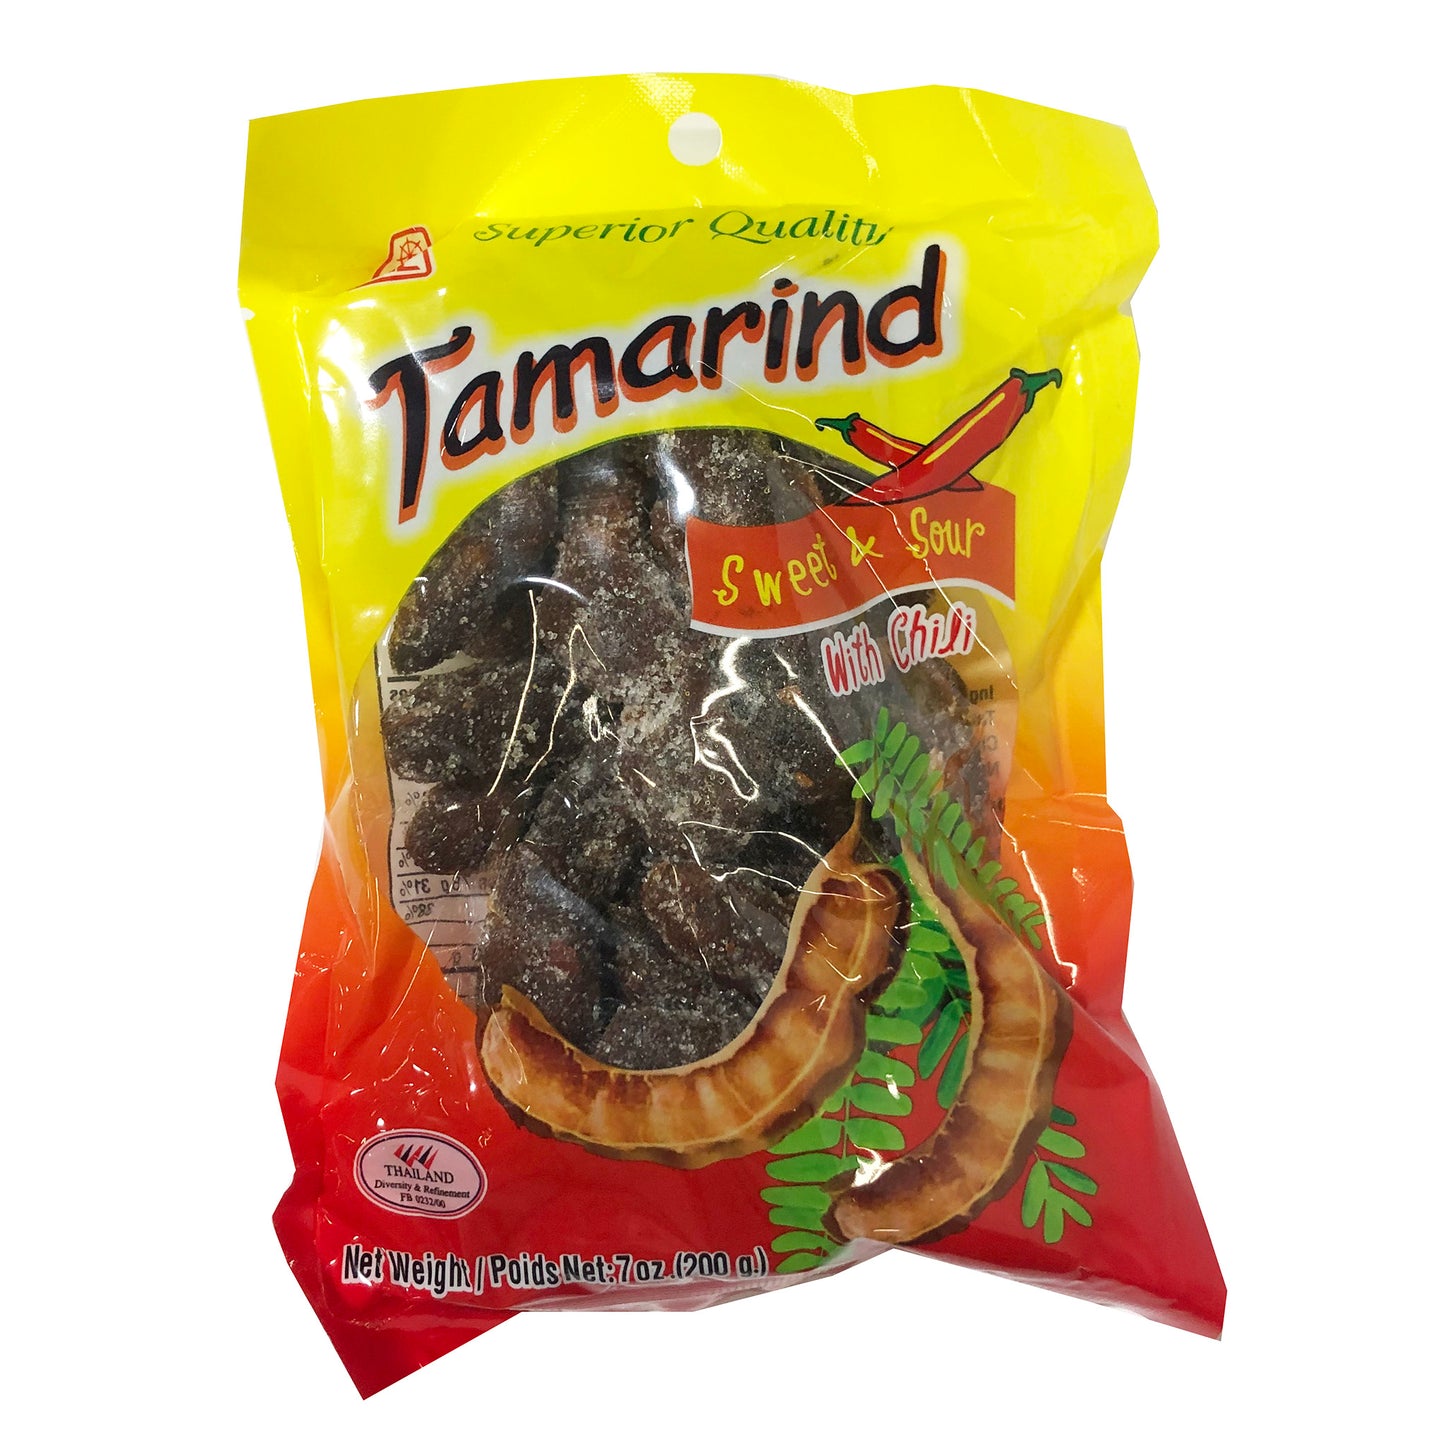 Front graphic image of Jhc Tamarind Candy Sweet And Sour Candy With Chili 7oz